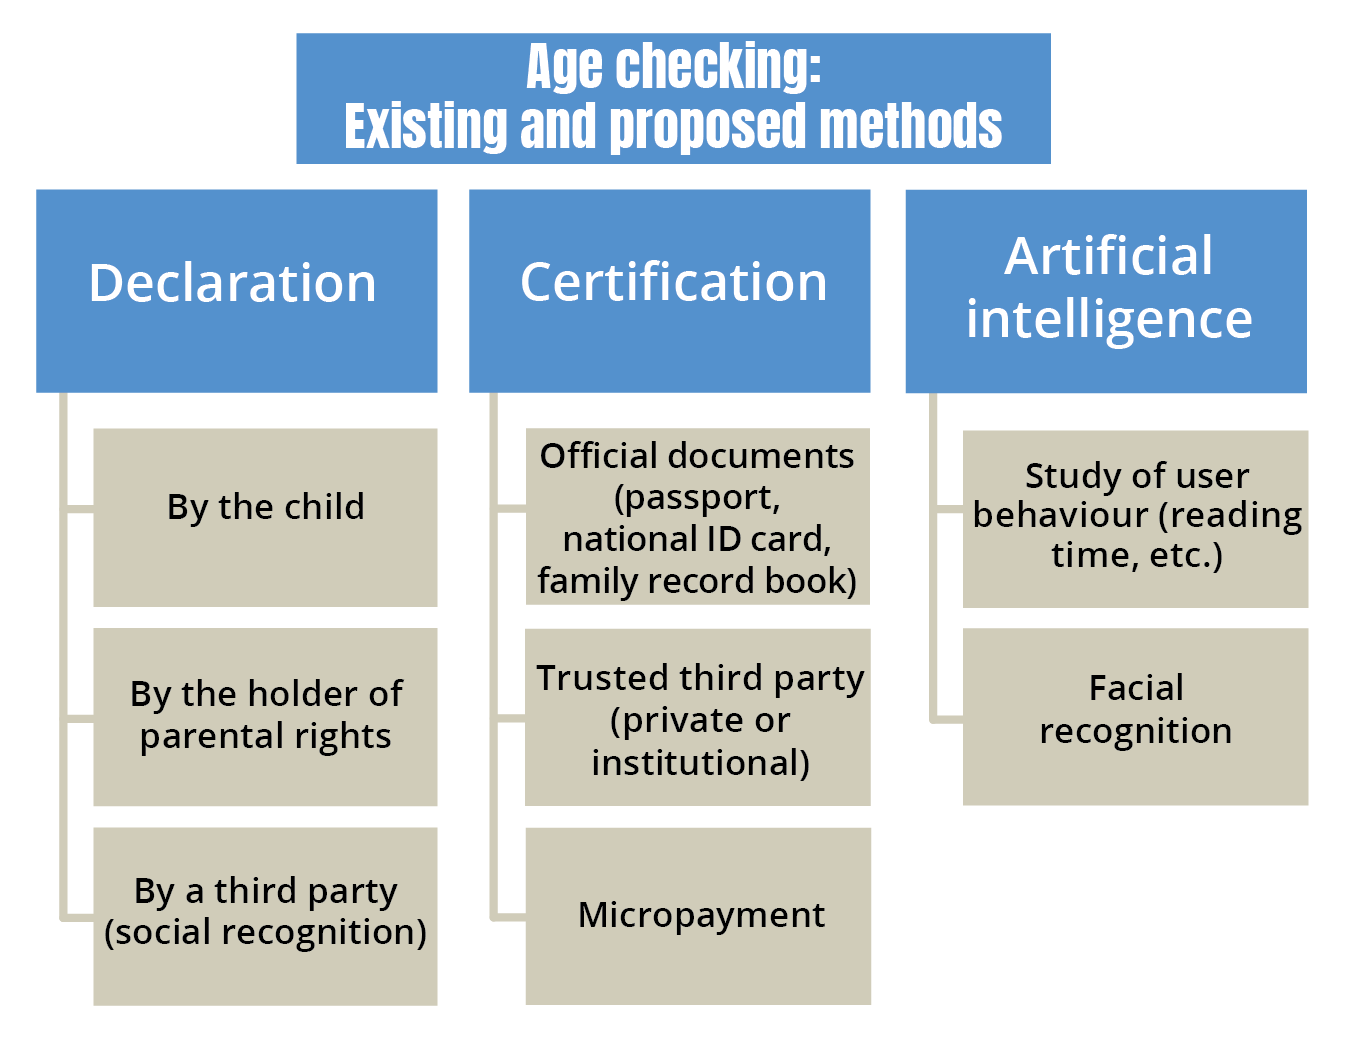 Age checking - Existing and proposed methods